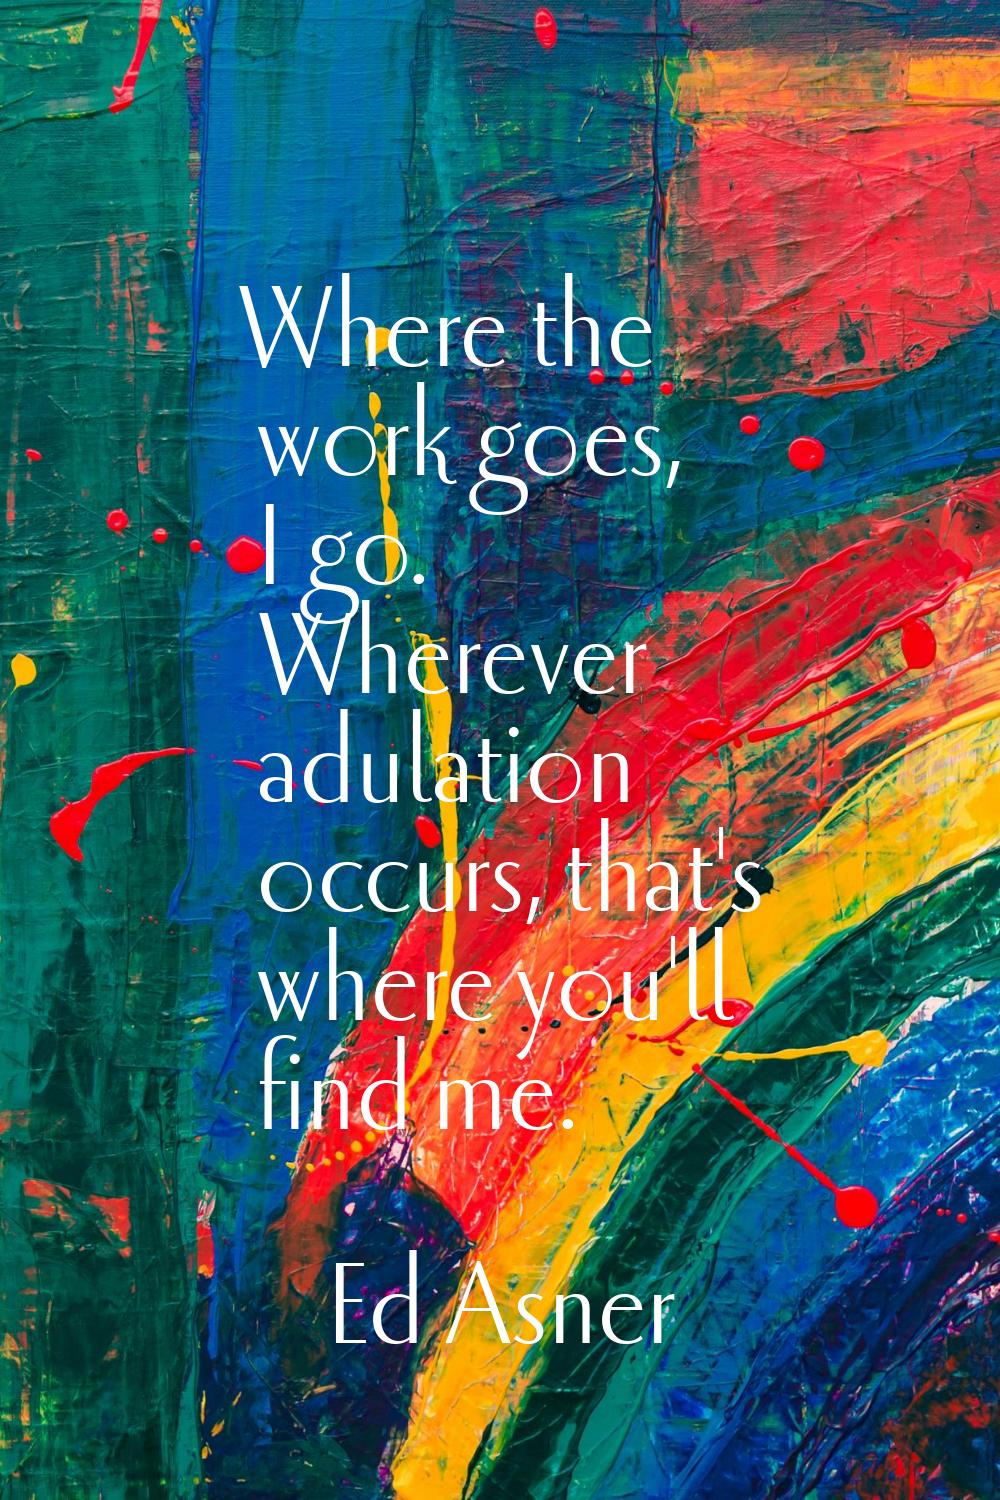 Where the work goes, I go. Wherever adulation occurs, that's where you'll find me.